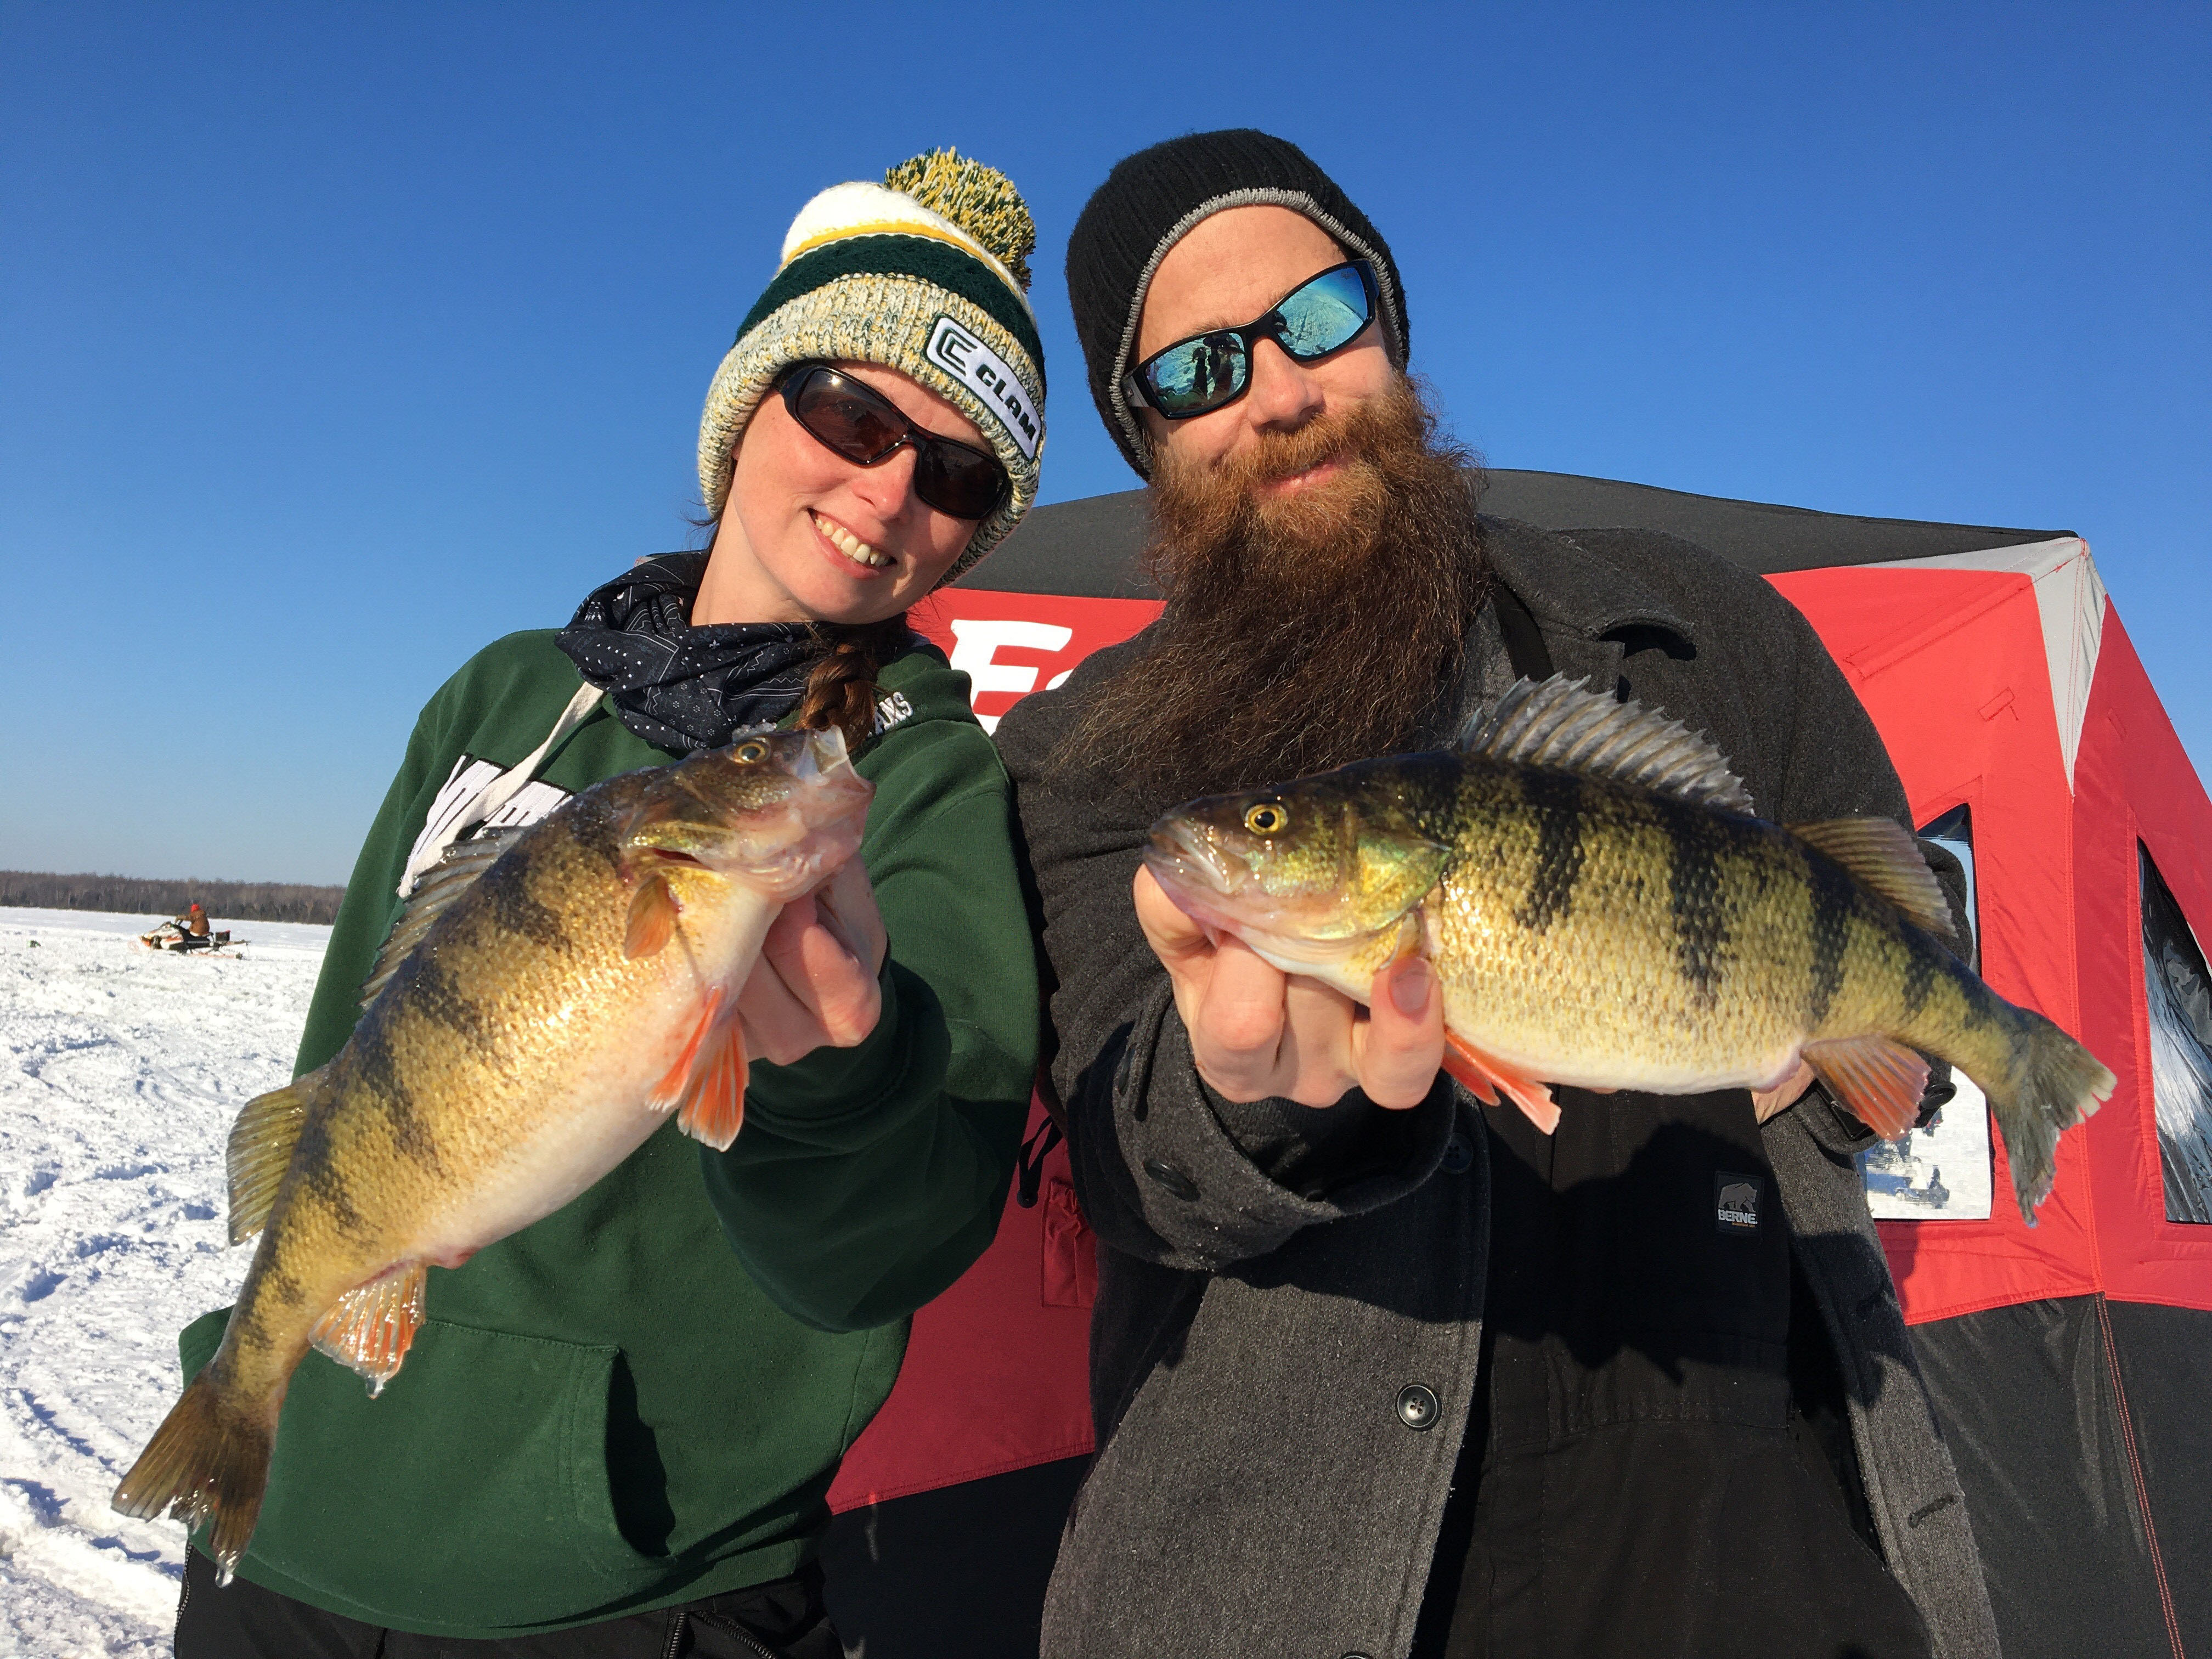 Showcasing the DNR: Heading out to new ice fishing waters